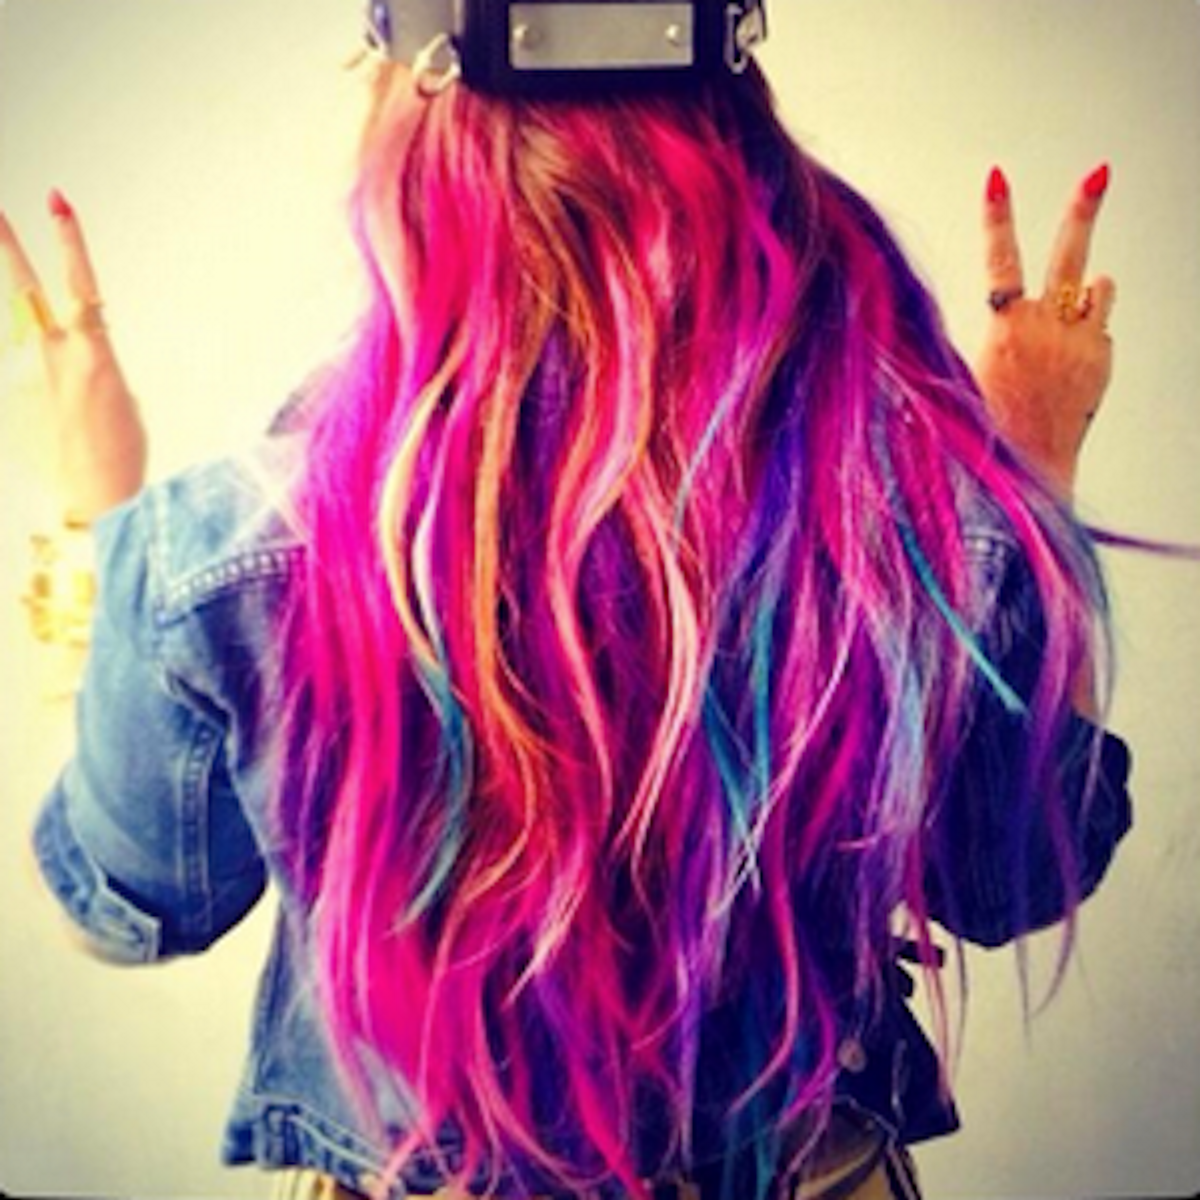 6 Questions People Ask When You Dye Your Hair All The Time